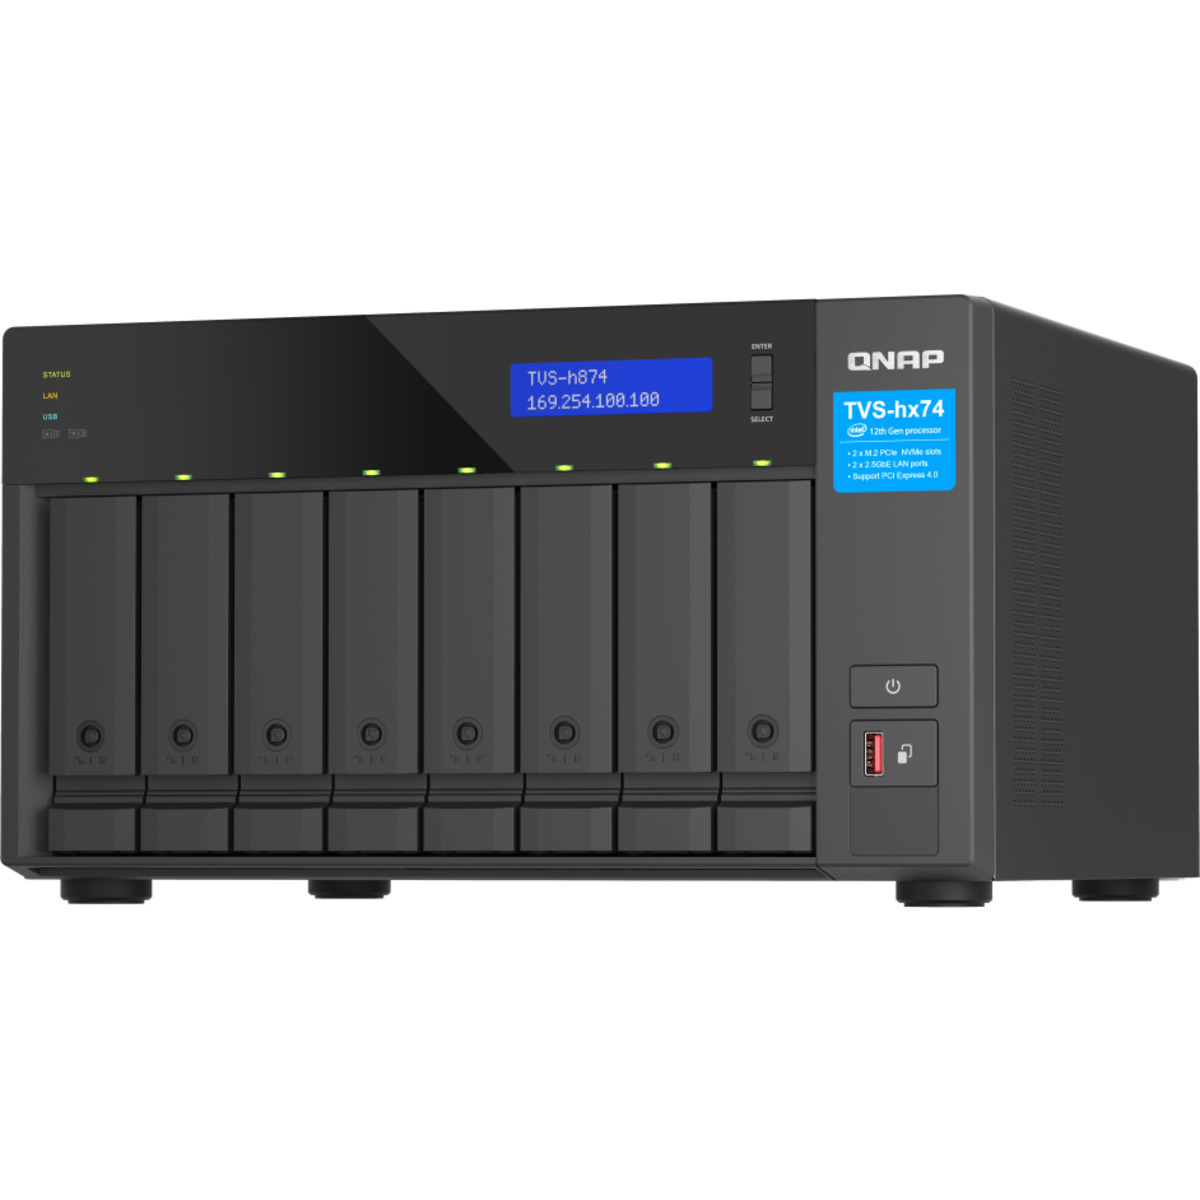 buy QNAP TVS-h874 Core i7 16tb Desktop NAS - Network Attached Storage Device 8x2000gb Seagate BarraCuda ST2000DM008 3.5 7200rpm SATA 6Gb/s HDD CONSUMER Class Drives Installed - Burn-In Tested - nas headquarters buy network attached storage server device das new raid-5 free shipping usa spring sale TVS-h874 Core i7